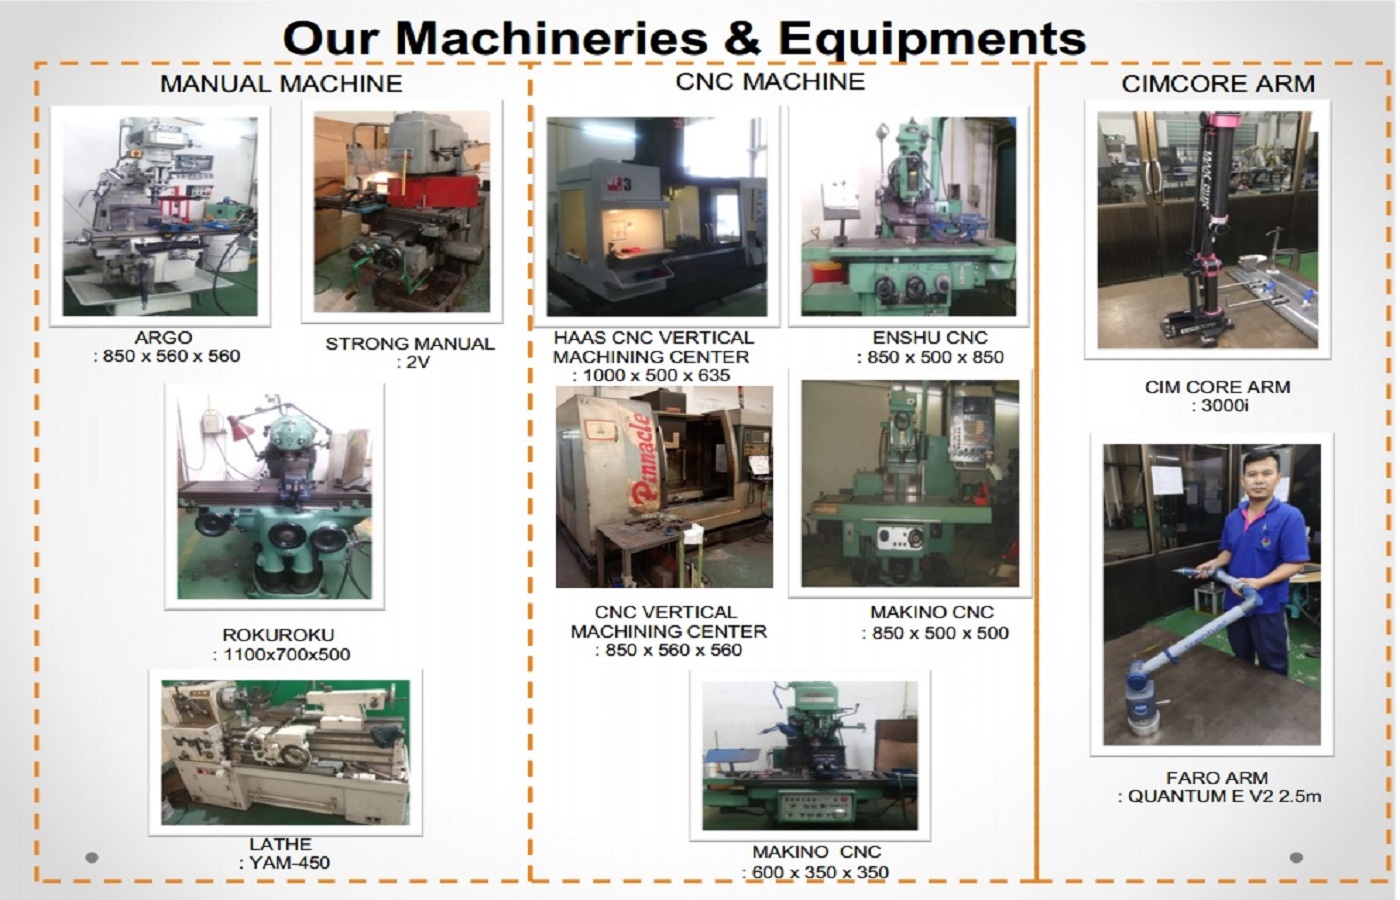 our machineriesre10263